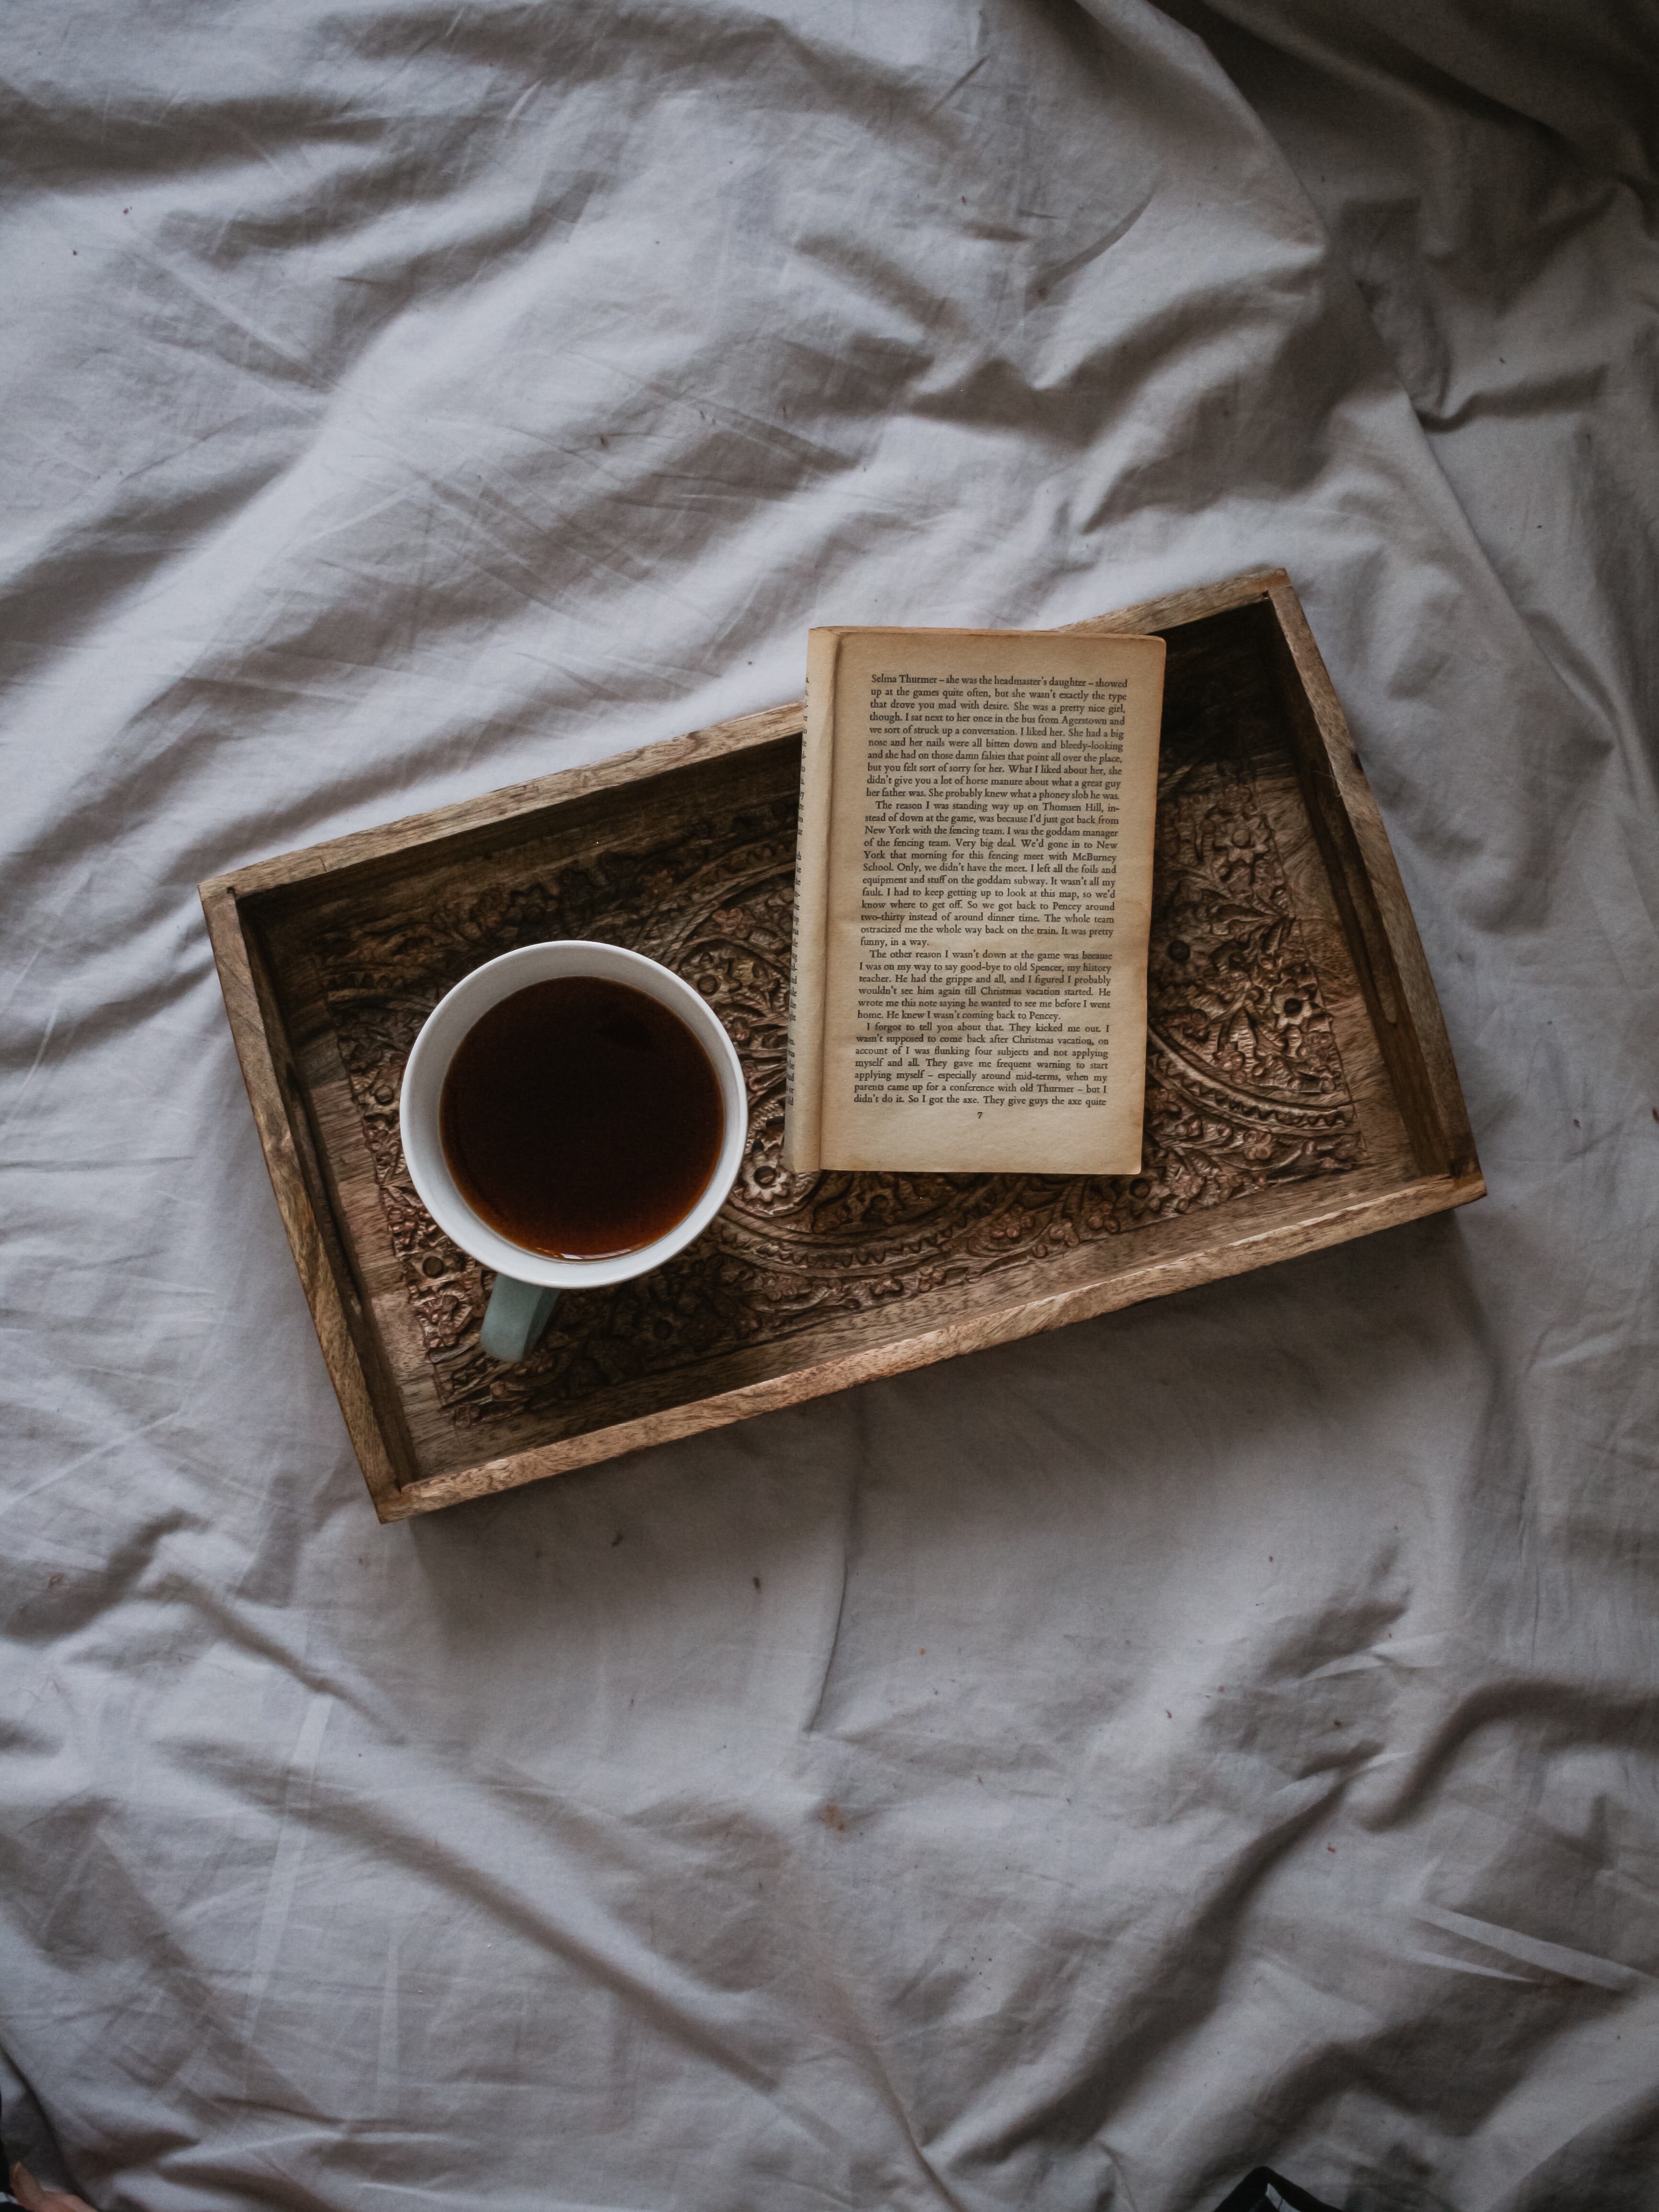 tray, tea, cup, miscellanea, miscellaneous, book, coziness, comfort images